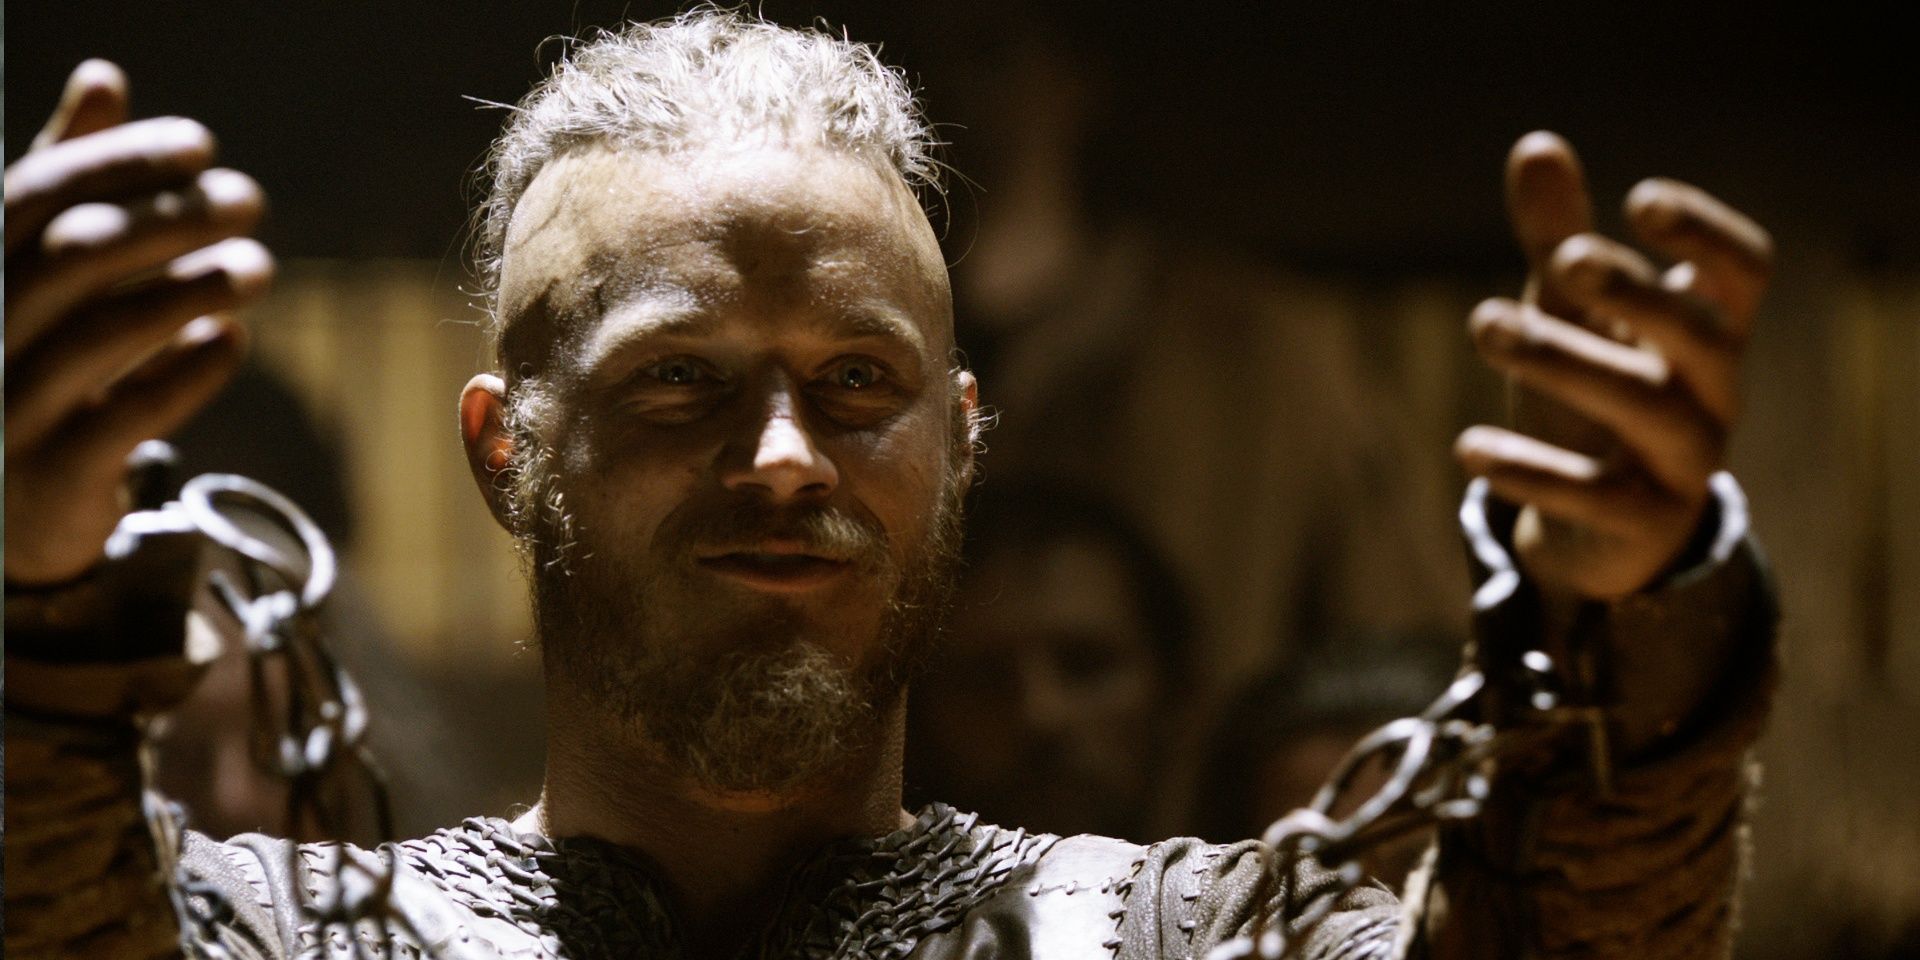 Ragnar asked to be released after winning the Knut murder case in Vikings